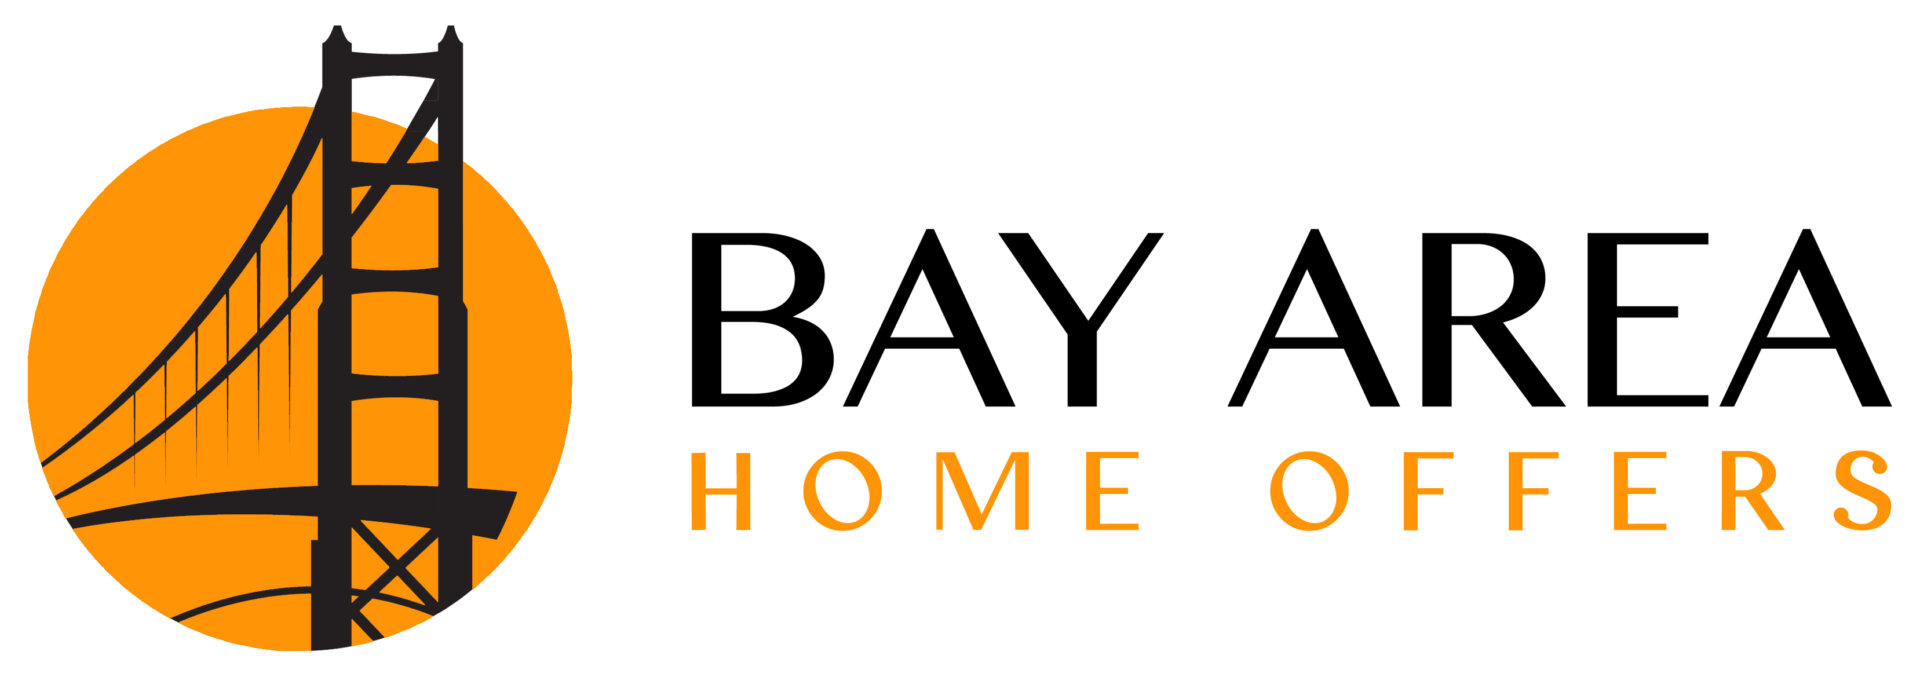 Bay Area Home Offers logo